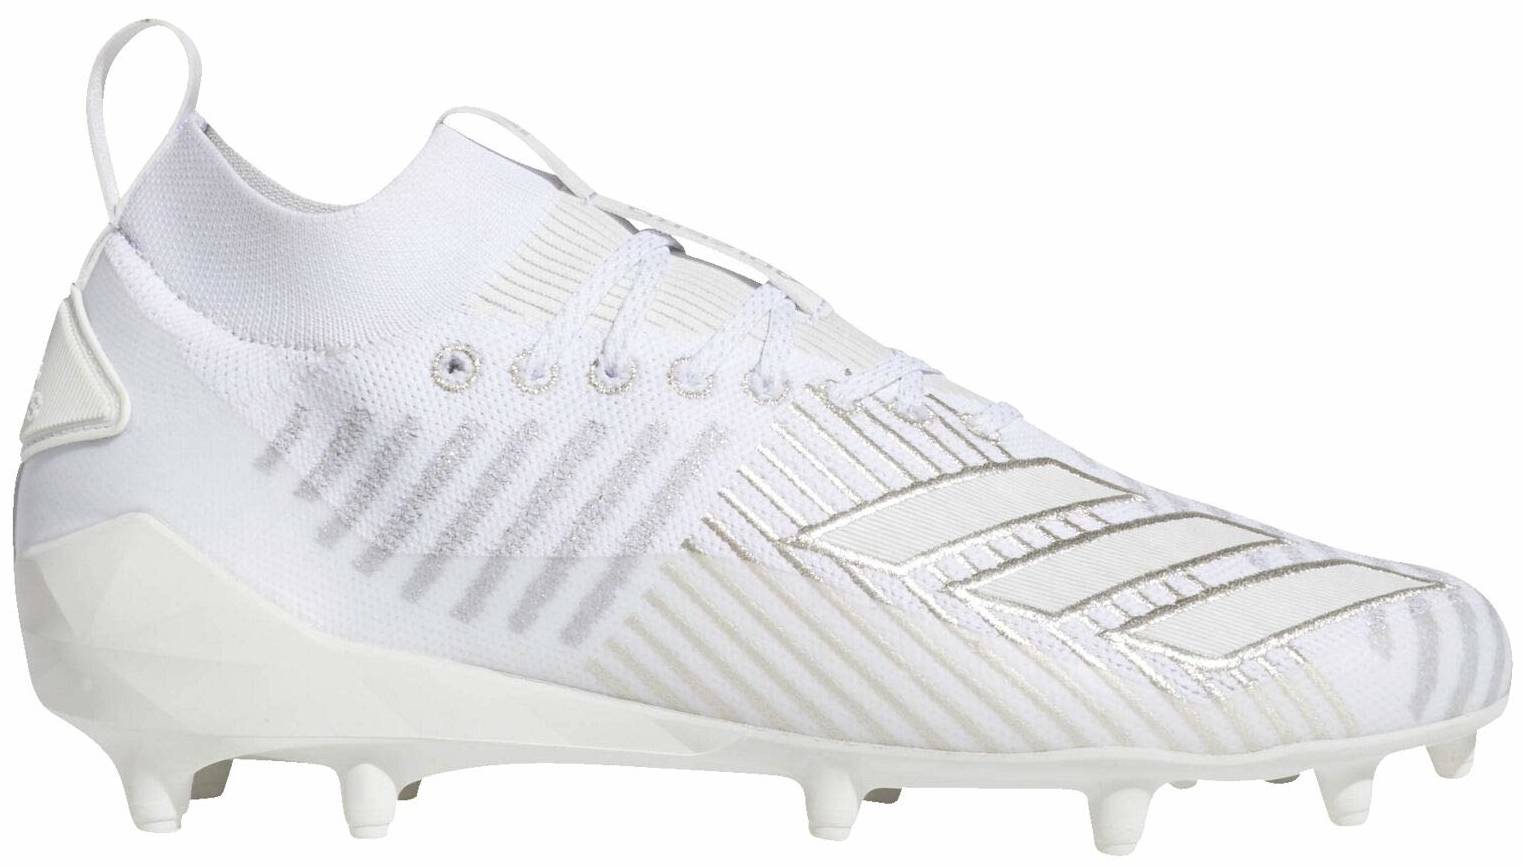 Save 50% on White Football Cleats (23 